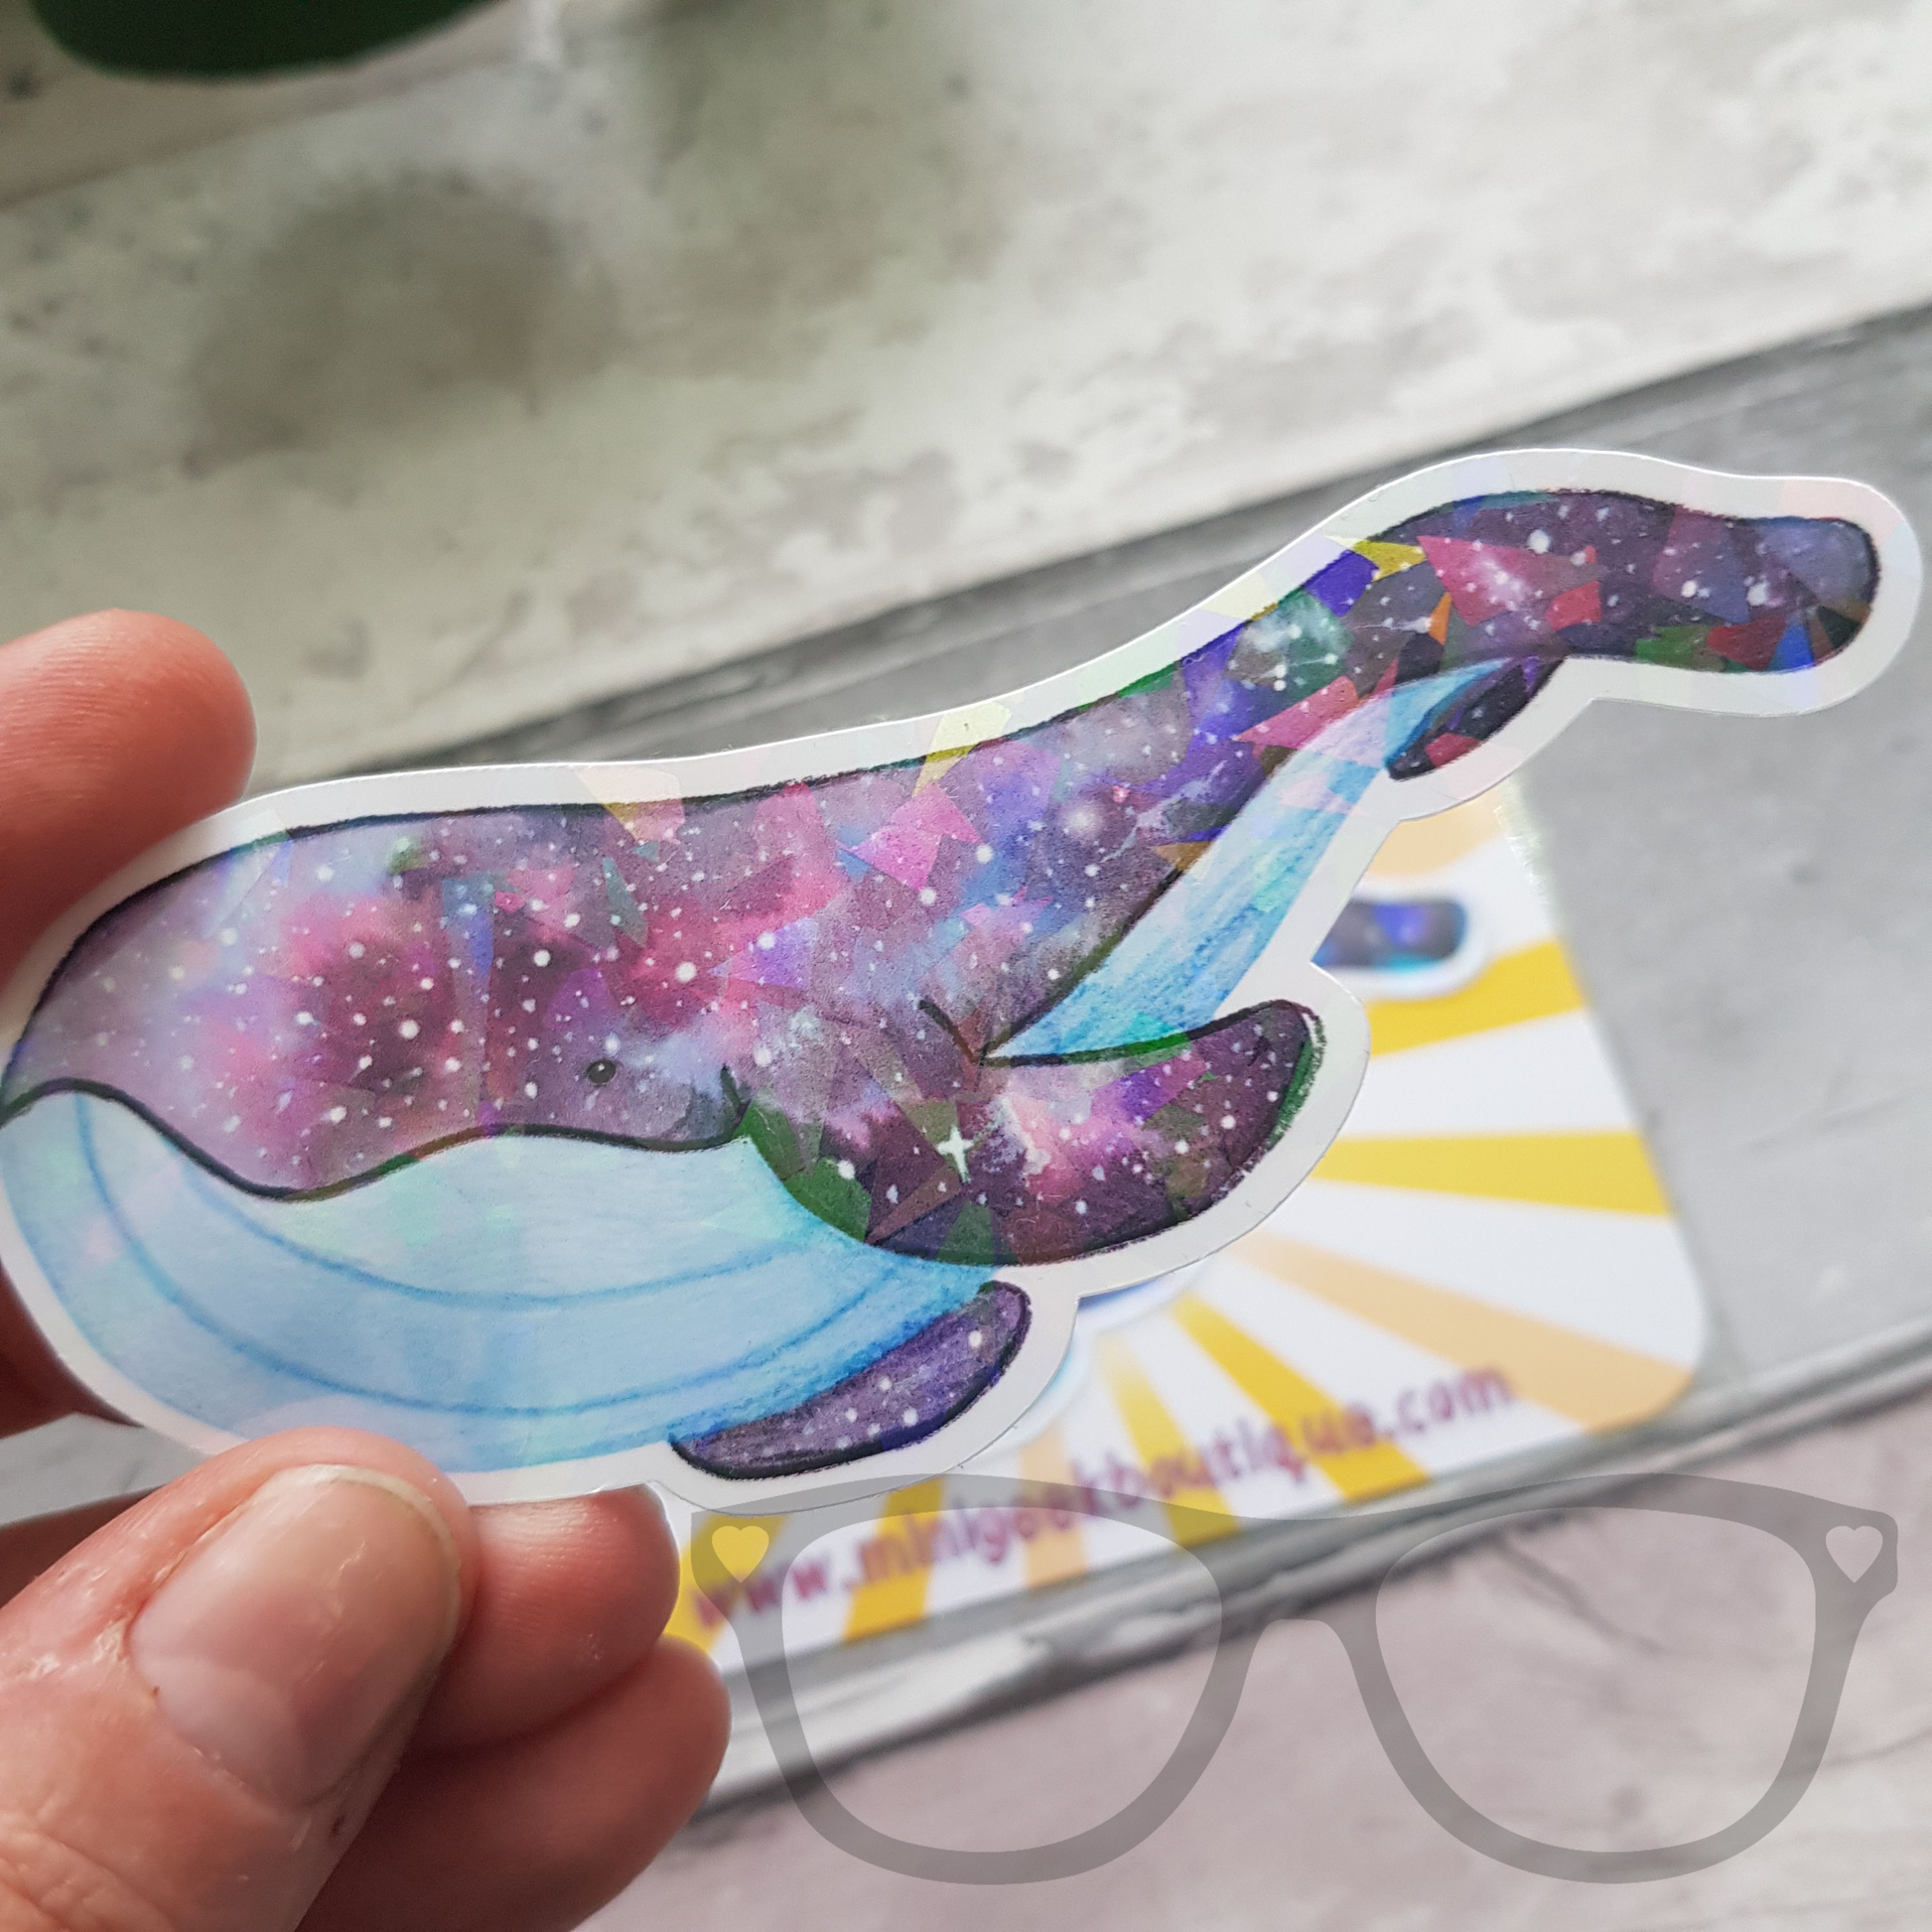 Sparkly space whale vinyl sticker great for decorating bottles, and notebooks.